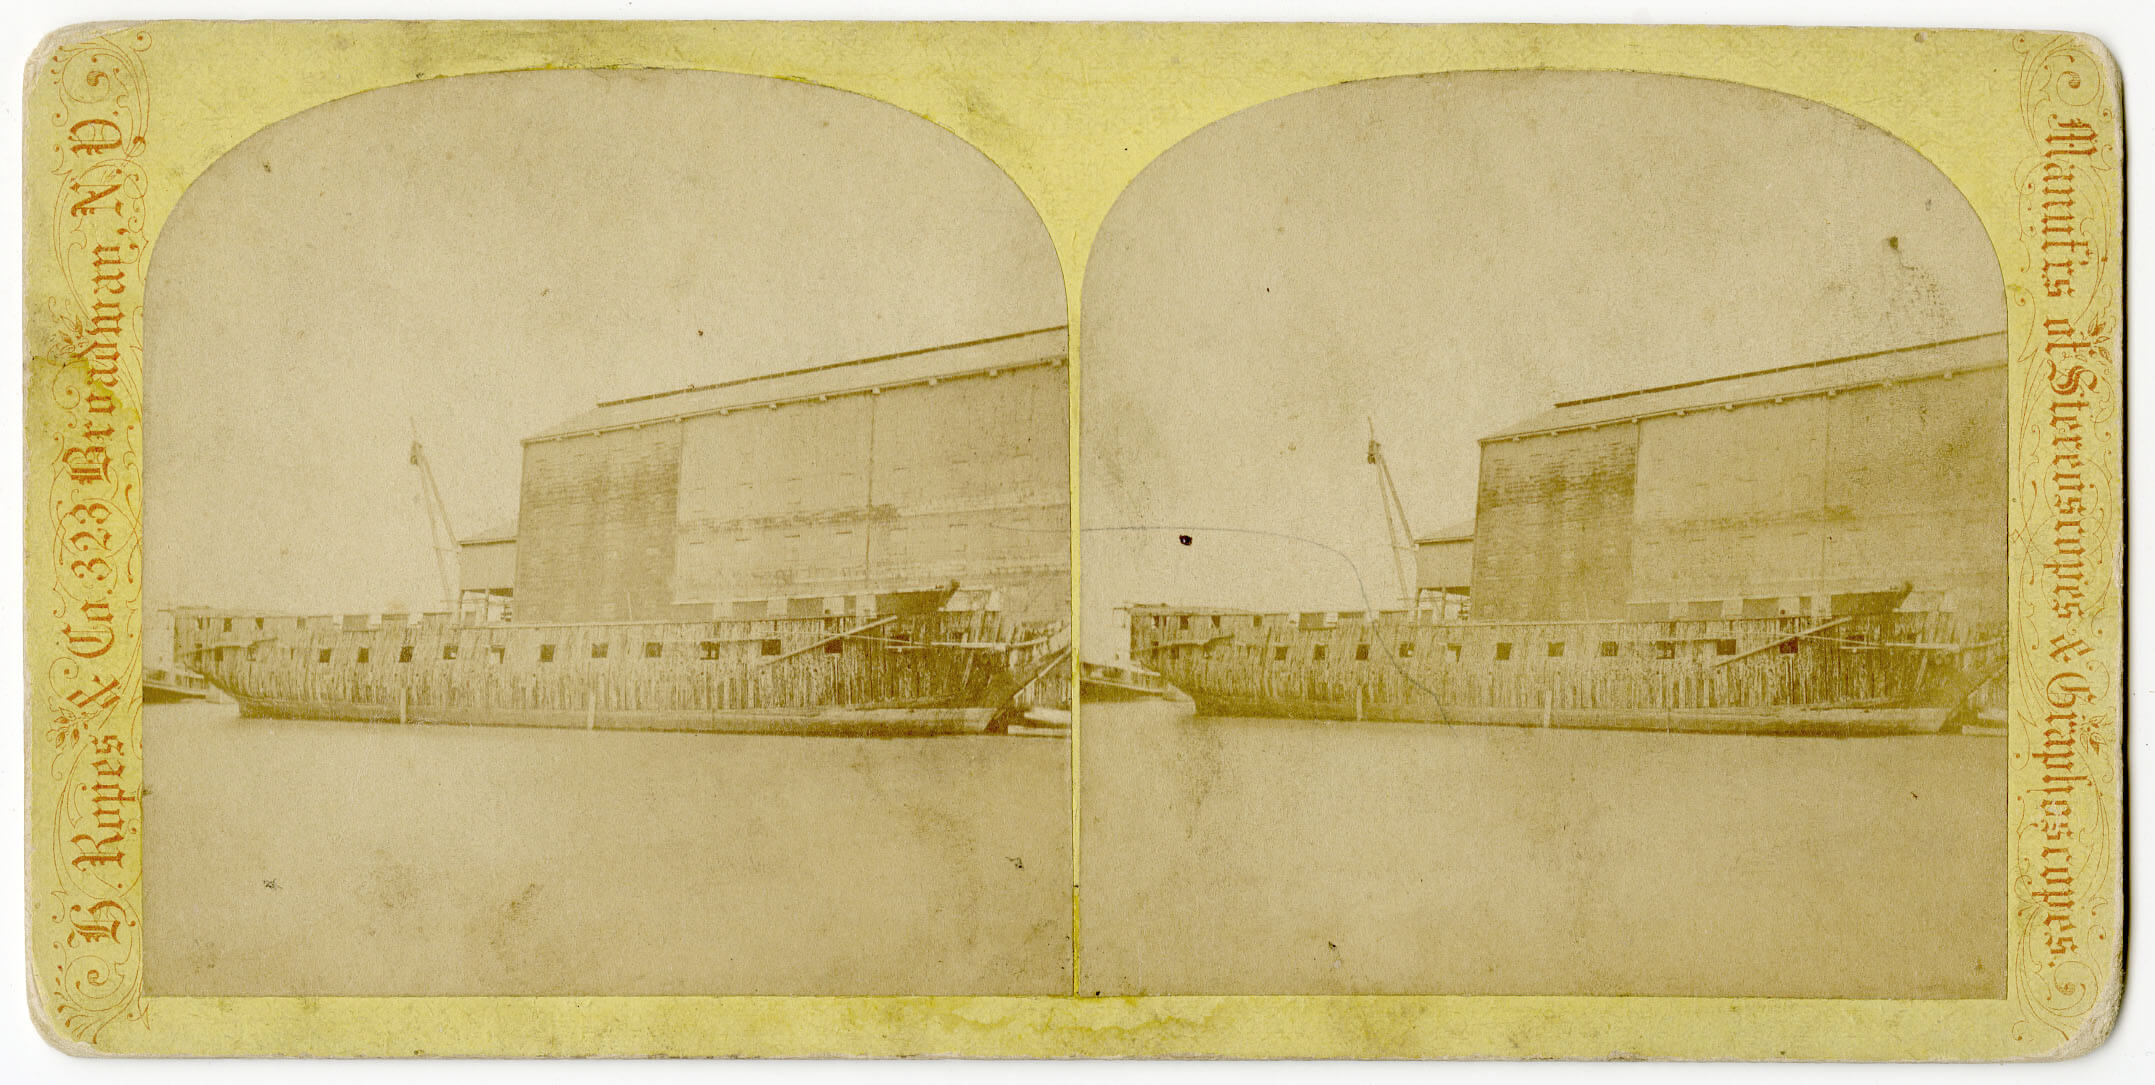 Stereograph of USS Constitution under restoration in Philadelphia, c. 1873-1877. [Commodores Fund Purchase]